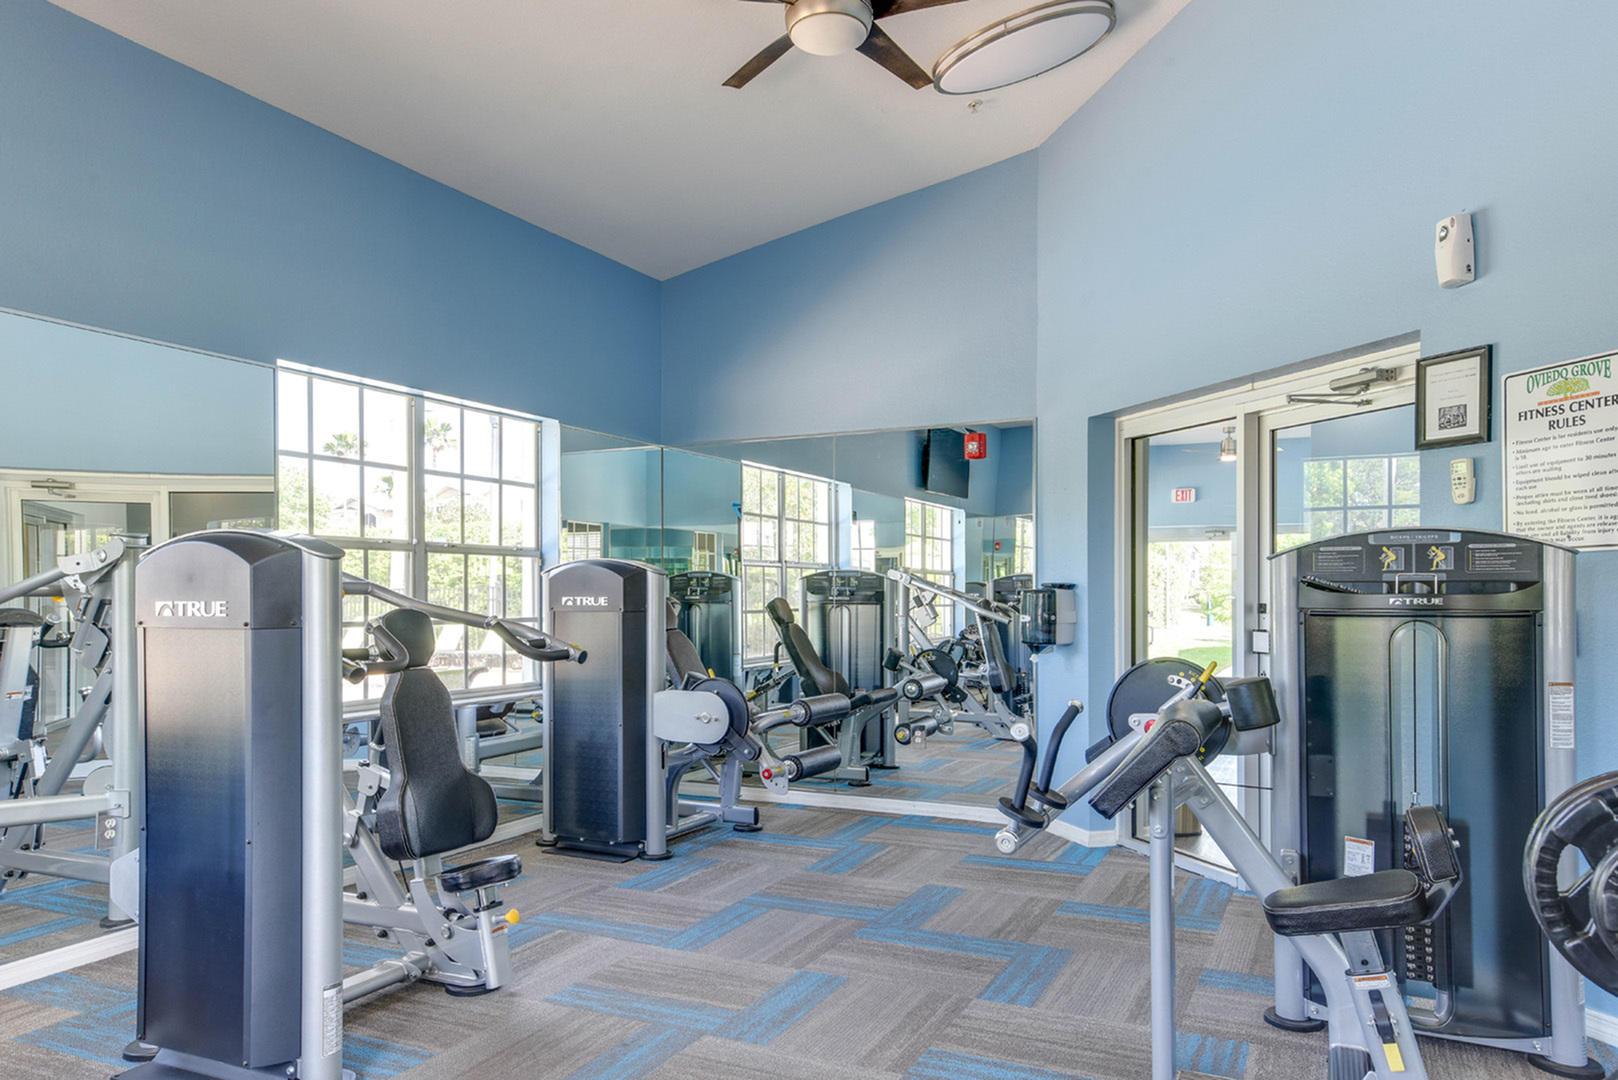 24-hour fitness center with cardio and weights